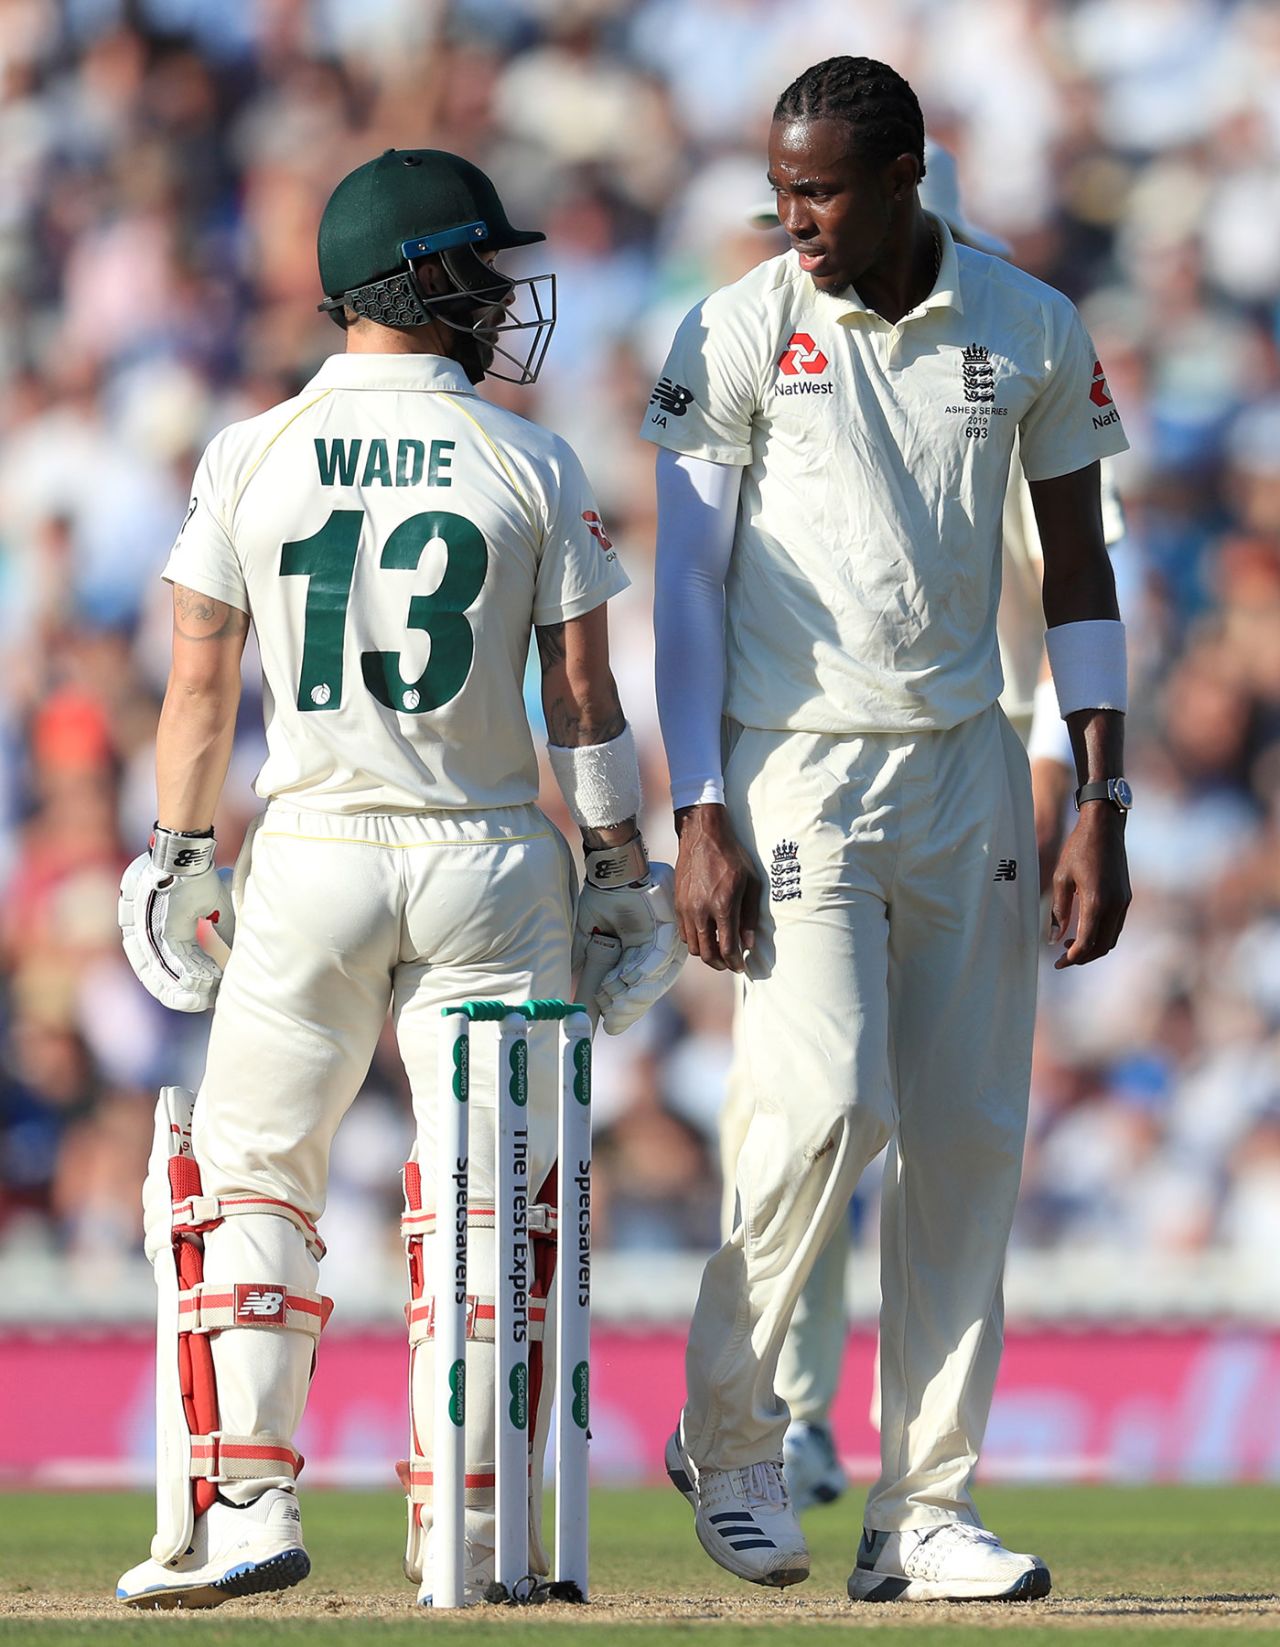 Matthew Wade and Jofra Archer exchange words during their duel, England v Australia, 5th Test, The Oval, September 15, 2019